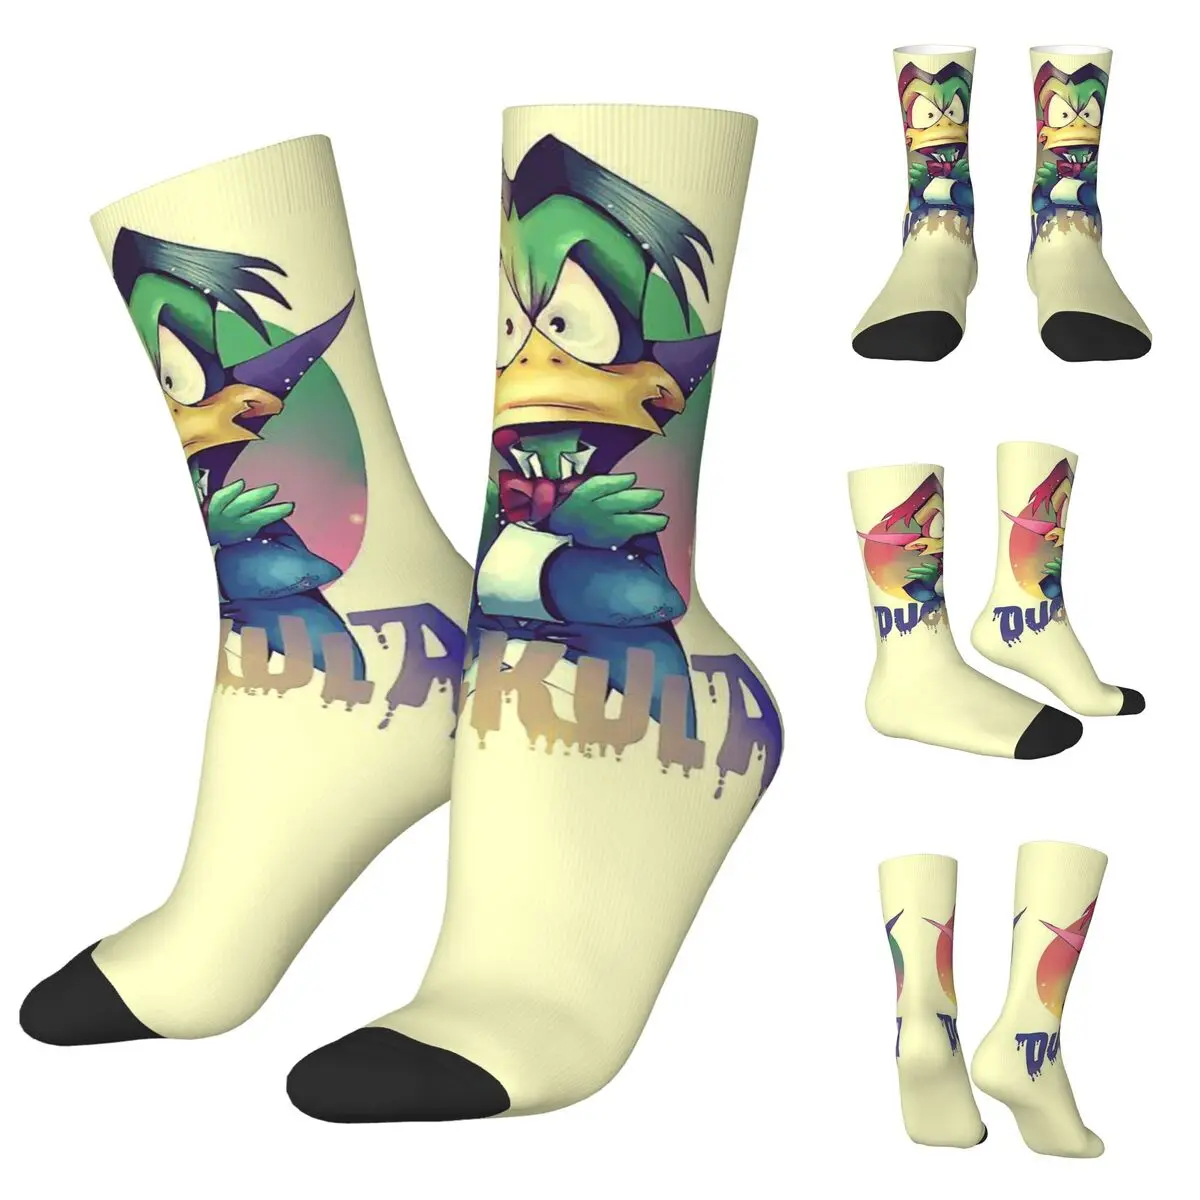 Count Duckula Vampire Lord The Castle Straight cosy Unisex Socks,Running Happy 3D printing Socks,Street Style Crazy Sock vampire the masquerade swansong pc